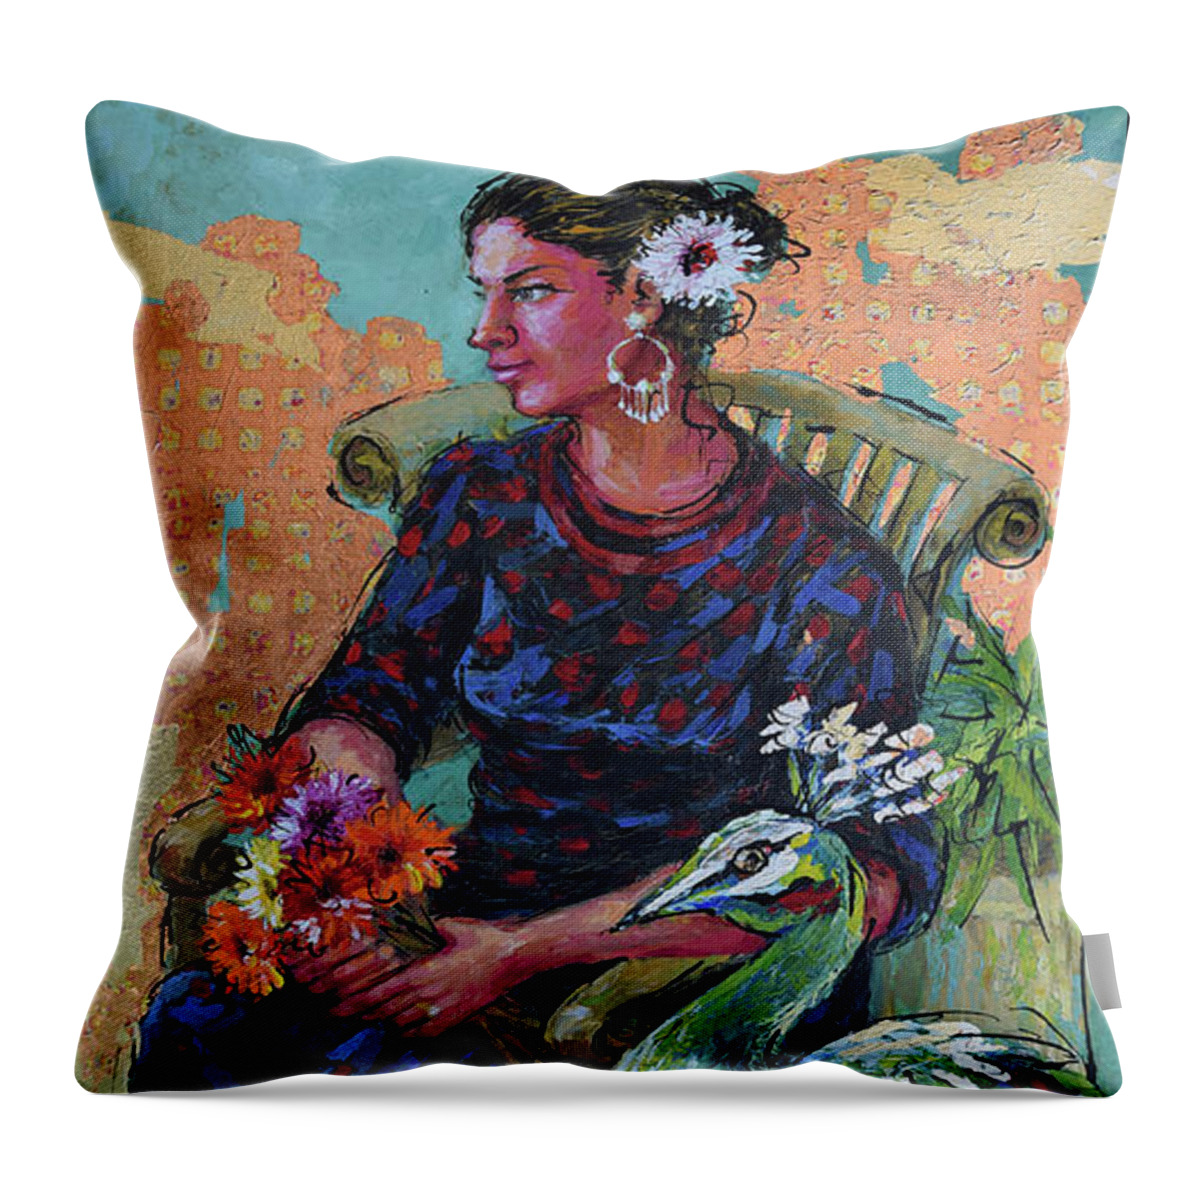 Woman Sitting In Garden Throw Pillow featuring the painting Garden Bliss by Jyotika Shroff